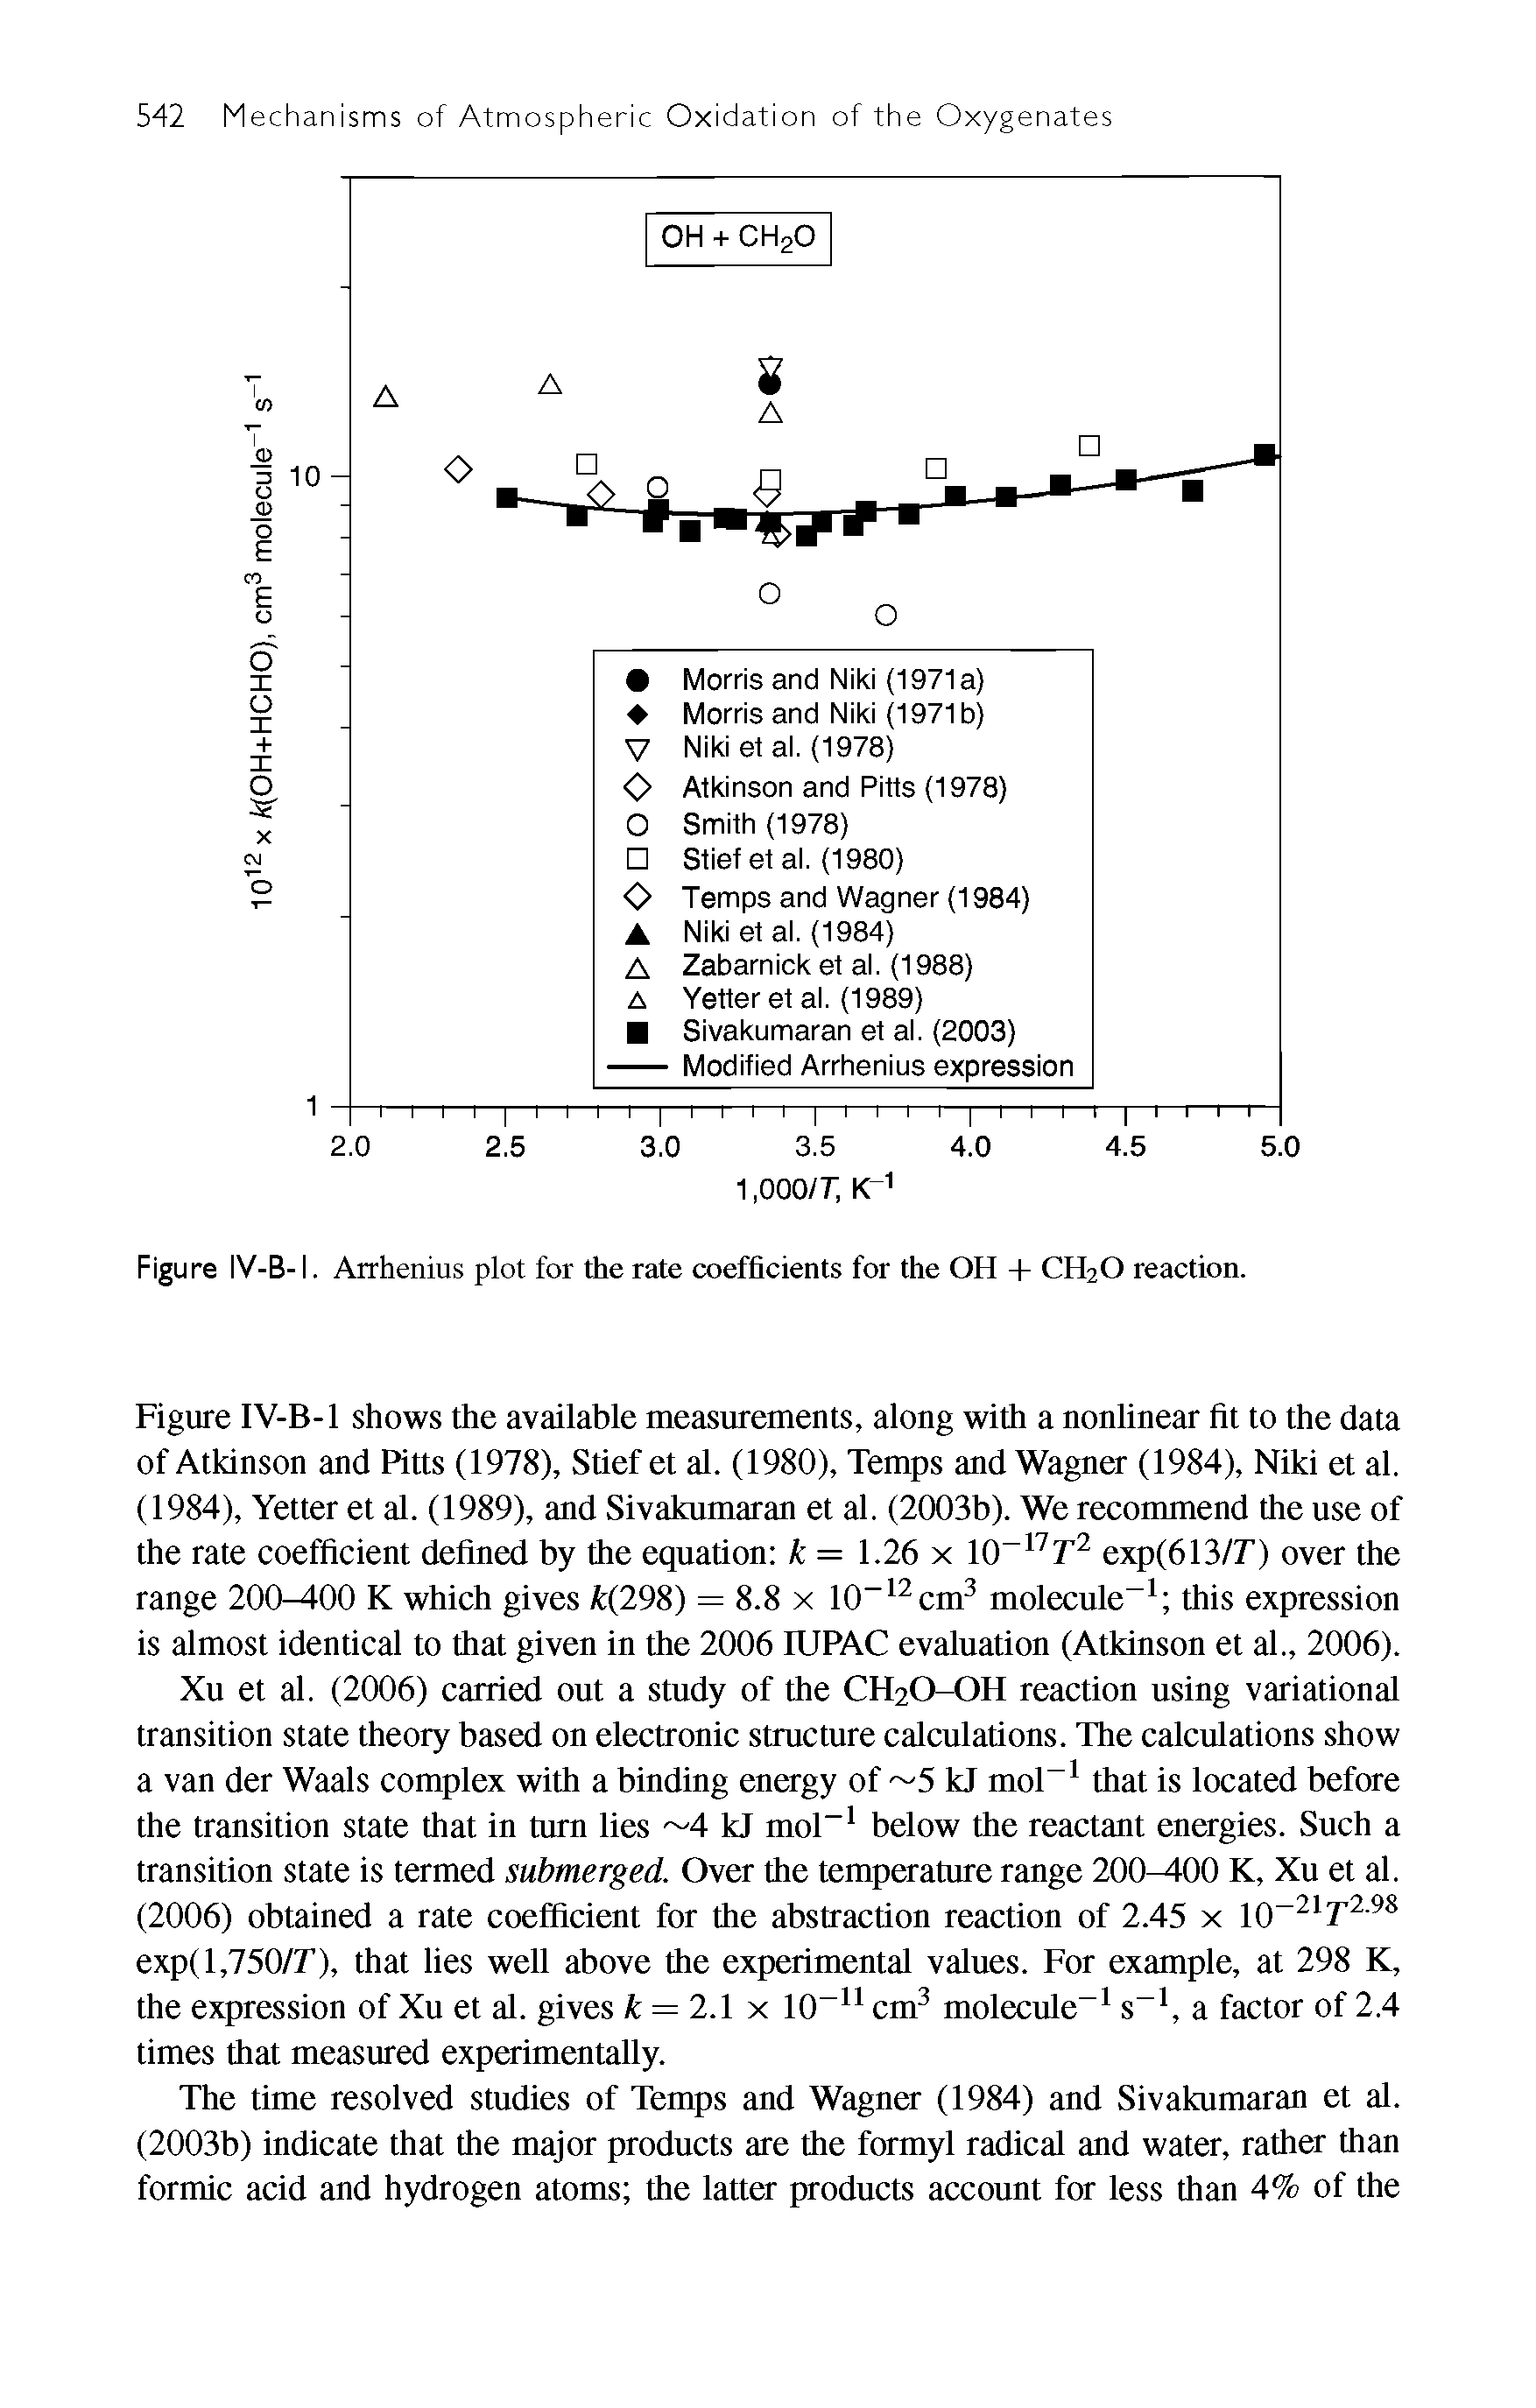 Figure IV-B-1 shows the available measurements, along with a nonlinear fit to the data of Atkinson and Ktts (1978), Stief et al. (1980), Temps and Wagner (1984), Niki et al. (1984), Yetter et al. (1989), and Sivakumaran et al. (2003b). We recommend the use of the rate coefficient defined by the equation = 1.26 x 10 r exp(613/r) over the range 200-400 K which gives k(298) = 8.8 X 10 cm molecule this expression is almost identical to that given in the 2006 lUPAC evaluation (Atkinson et al., 2006).